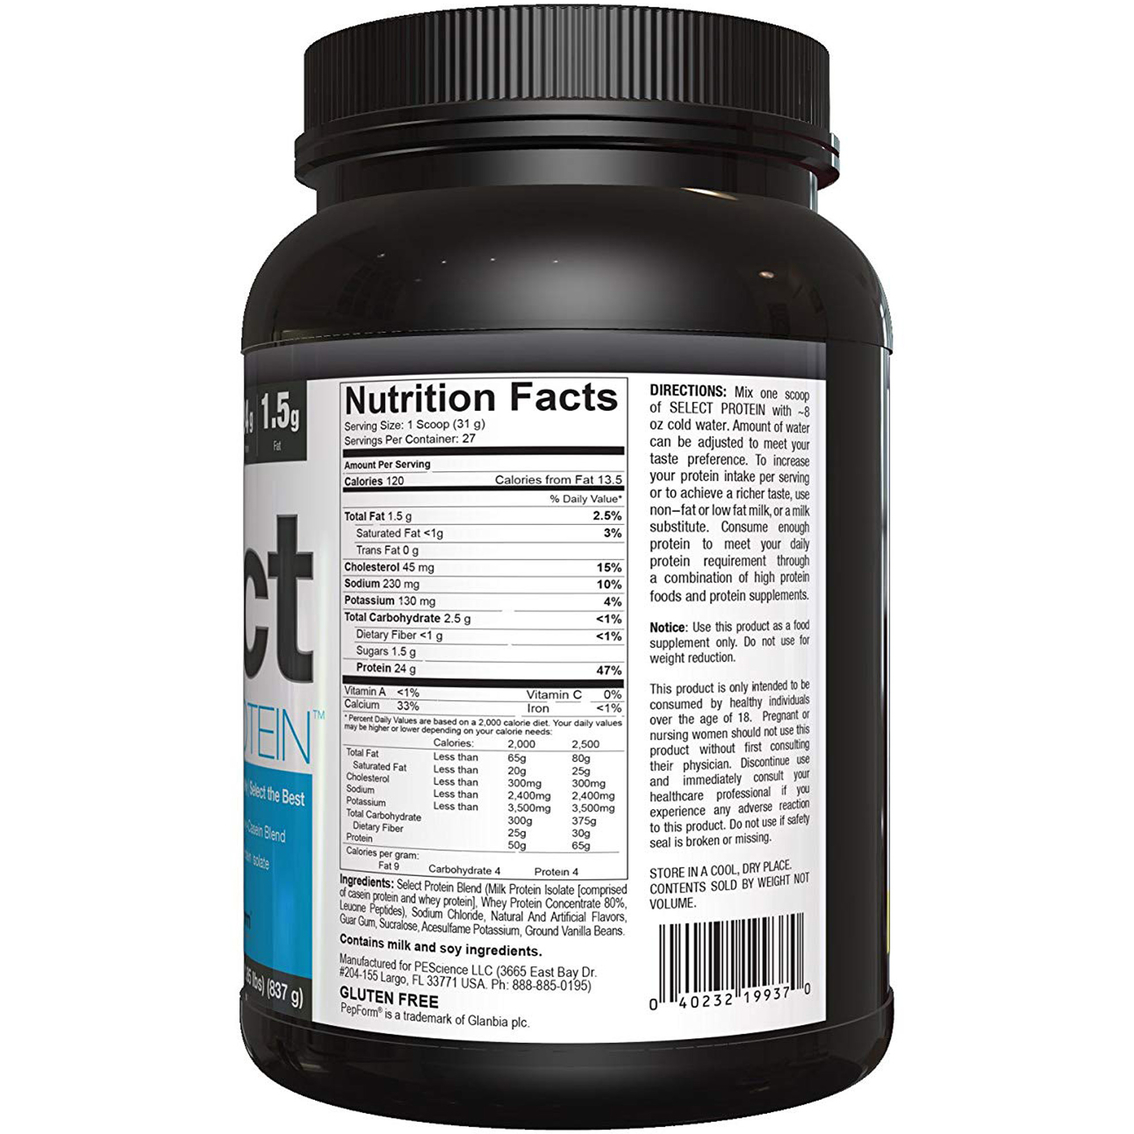 PEScience Select Protein, Assorted Flavors, 27 Servings - Image 2 of 2